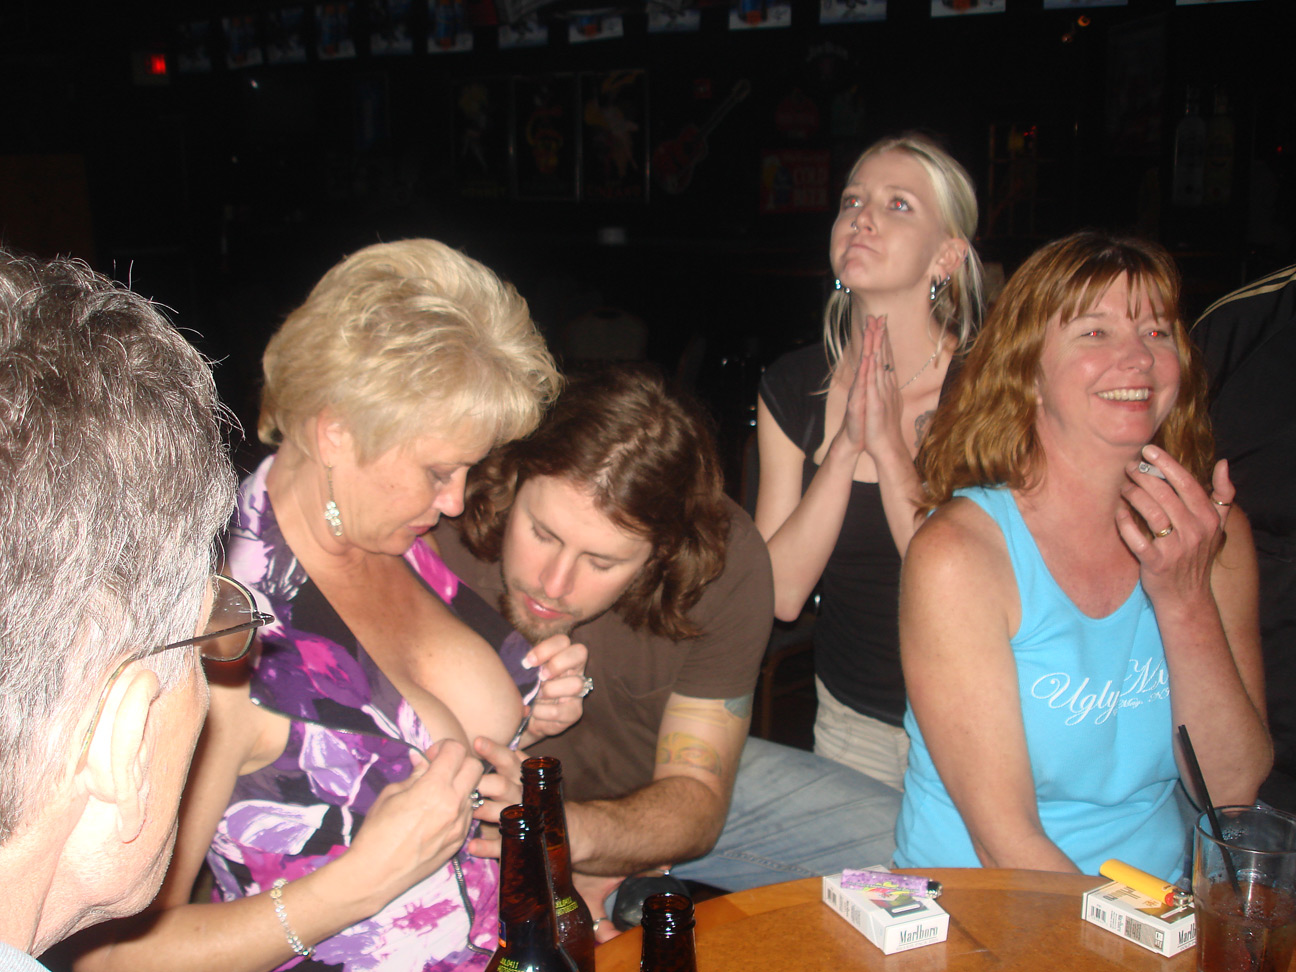 Nudist Tampa Swingers - Our Real Tampa Swingers Monthly Bar Meet And Greet